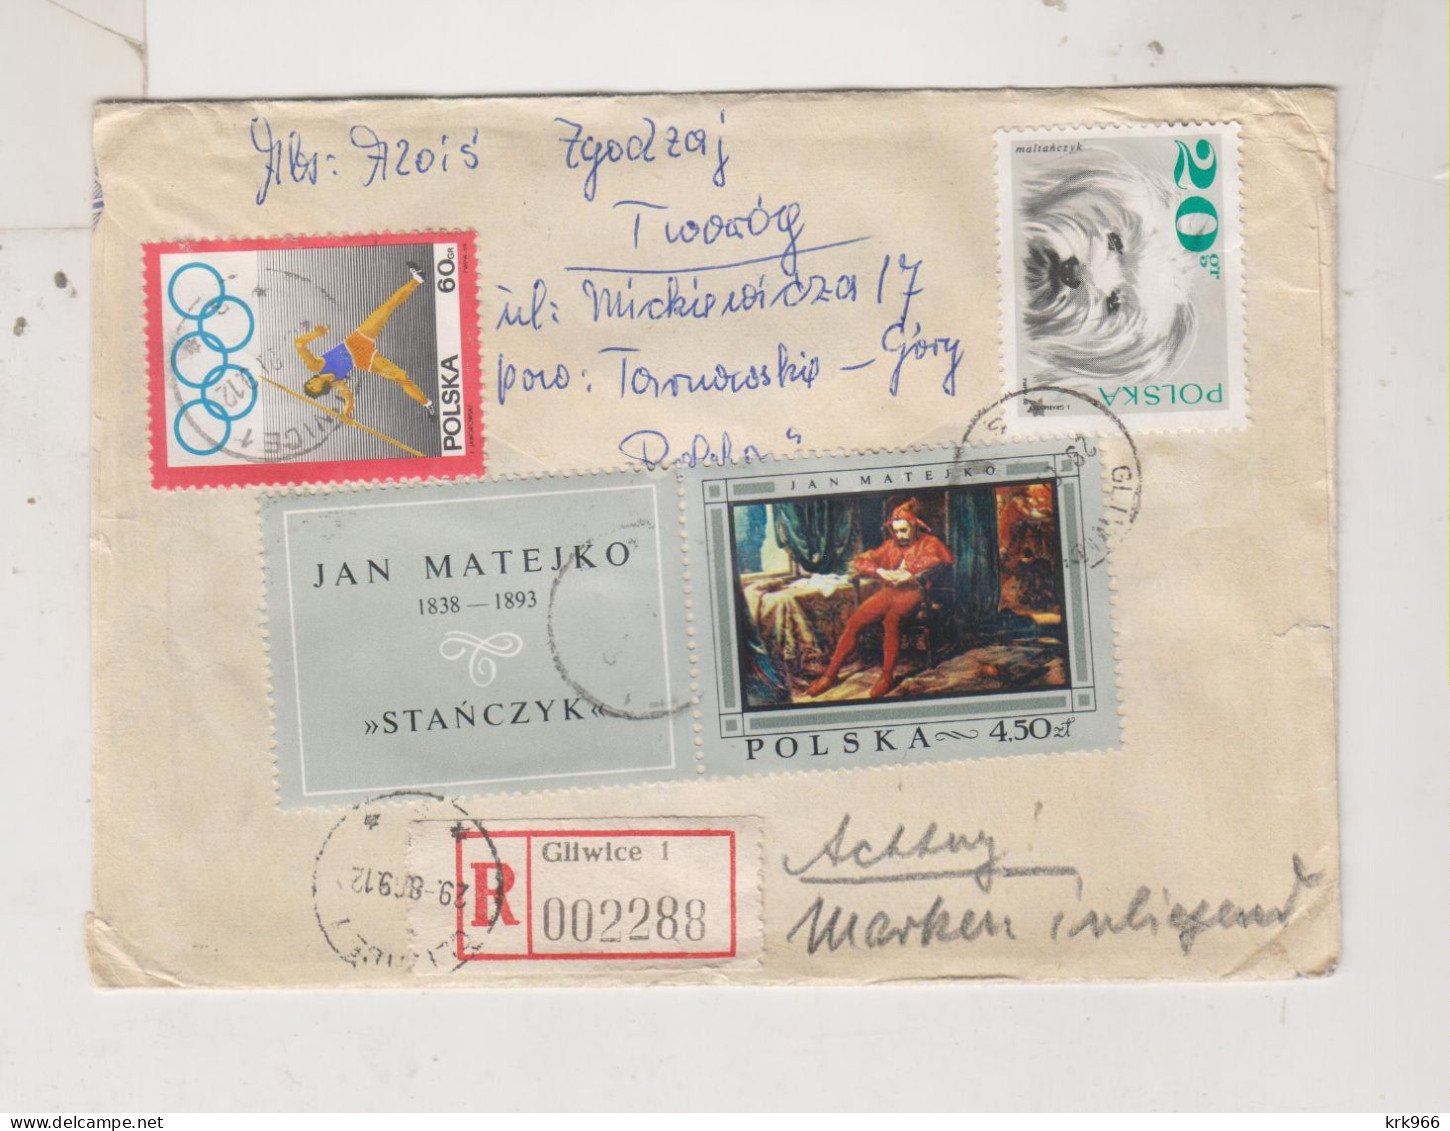 POLAND 1969  GLIWICE Registered Cover To Germany - Covers & Documents